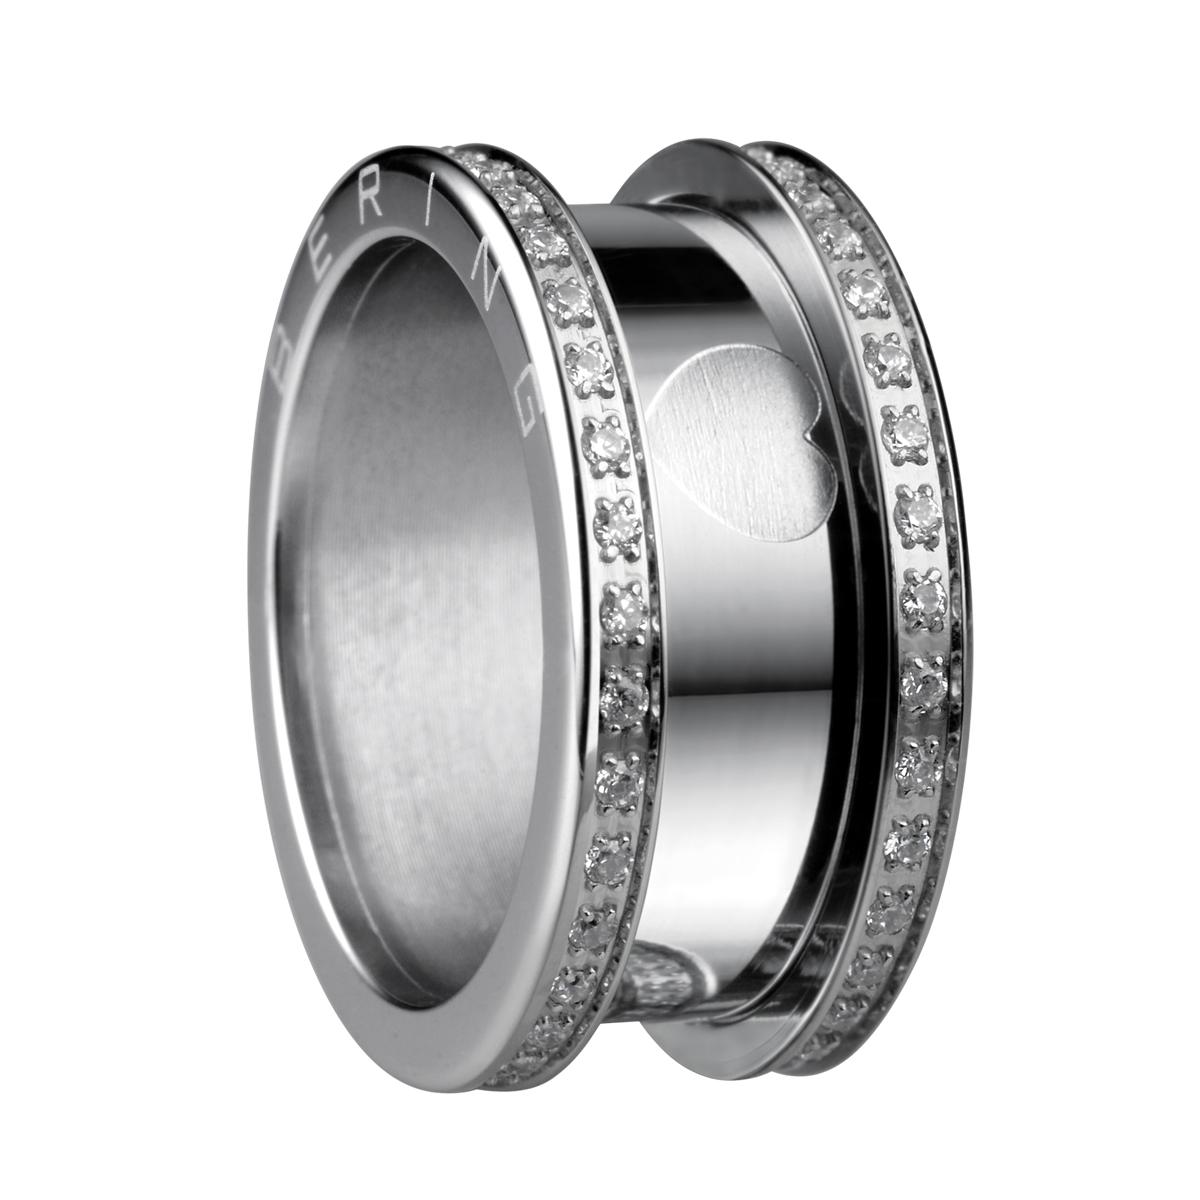 Bering Outer Ring 5231754 1